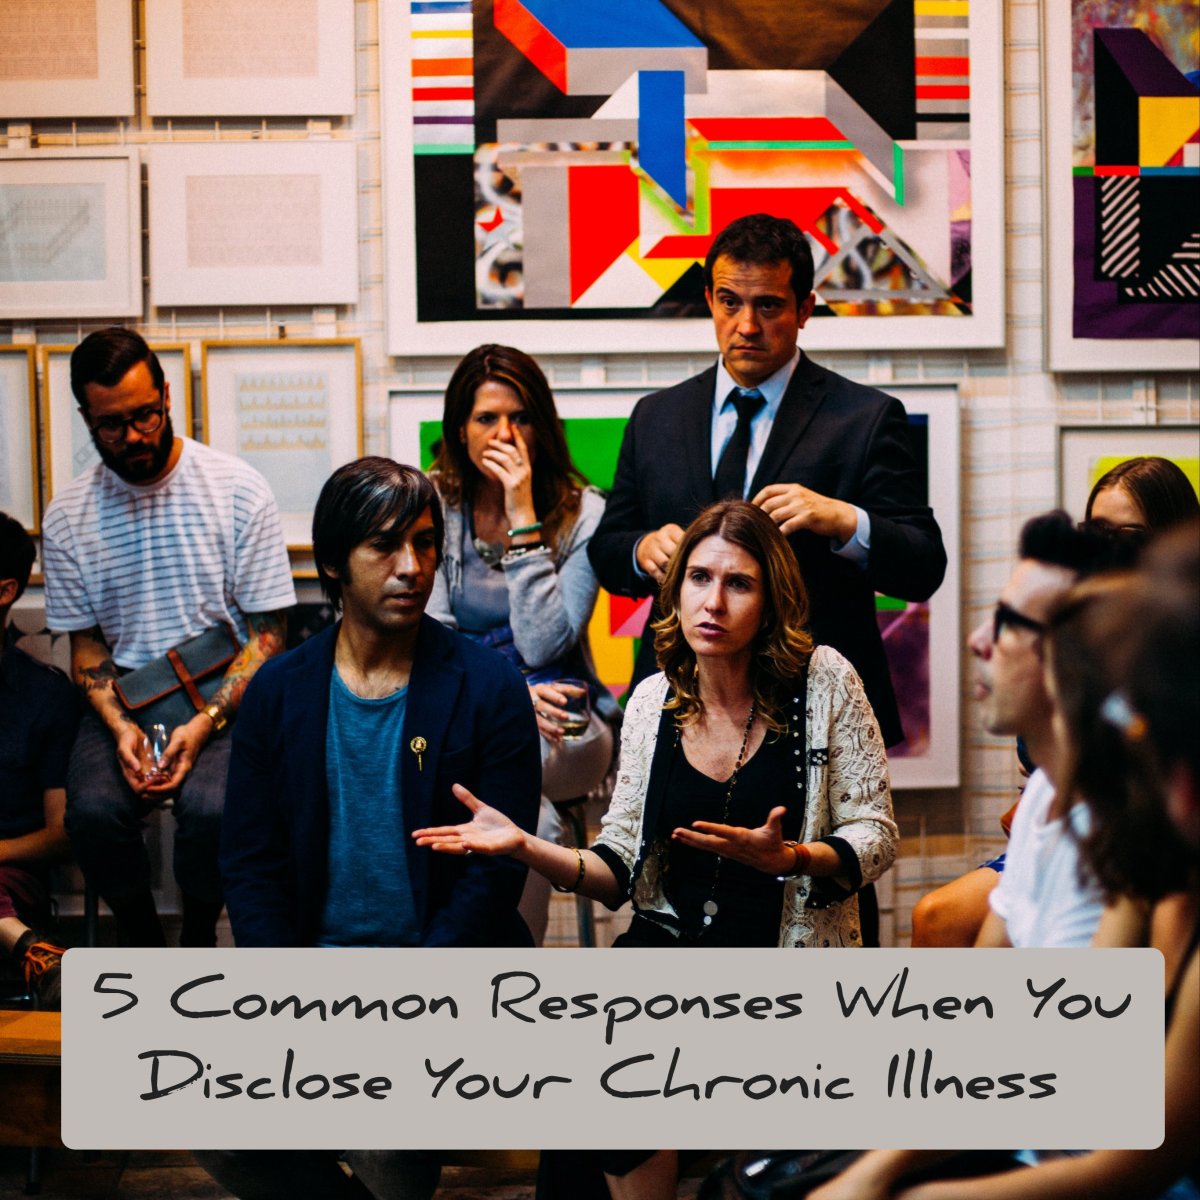 5 Common Responses When You Disclose Your Chronic Illness